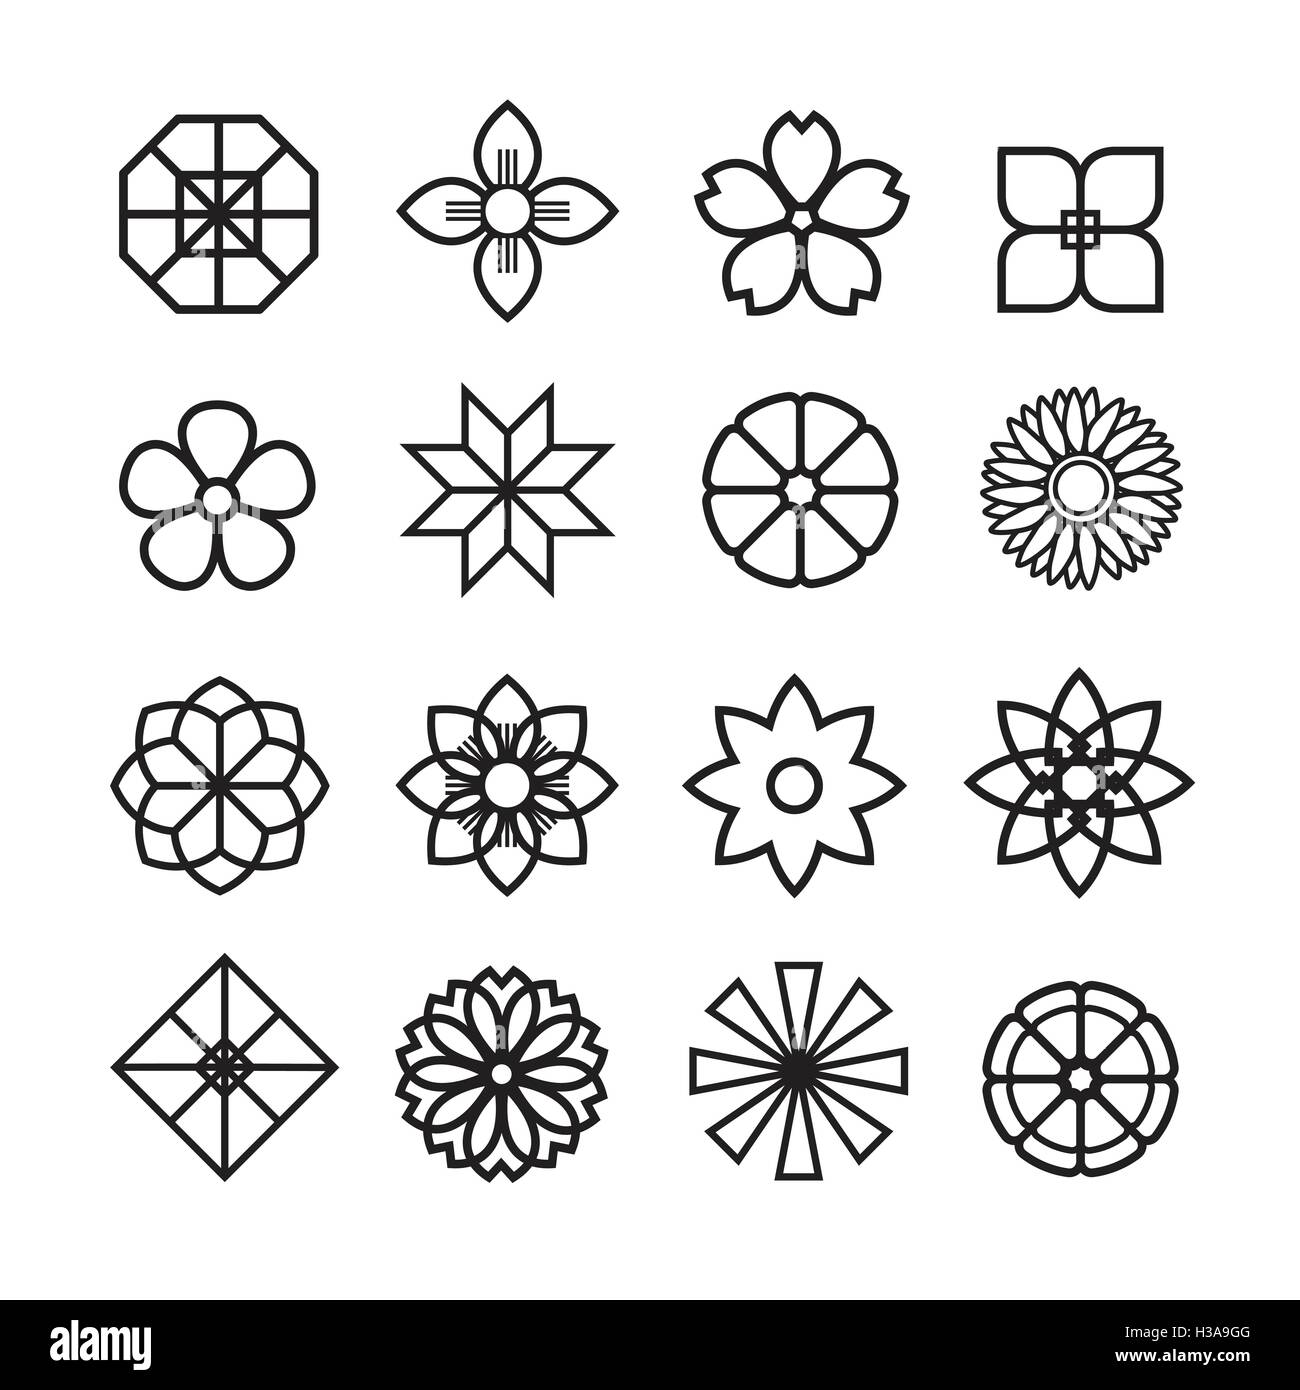 Flowers ornament icon,vector set Stock Vector